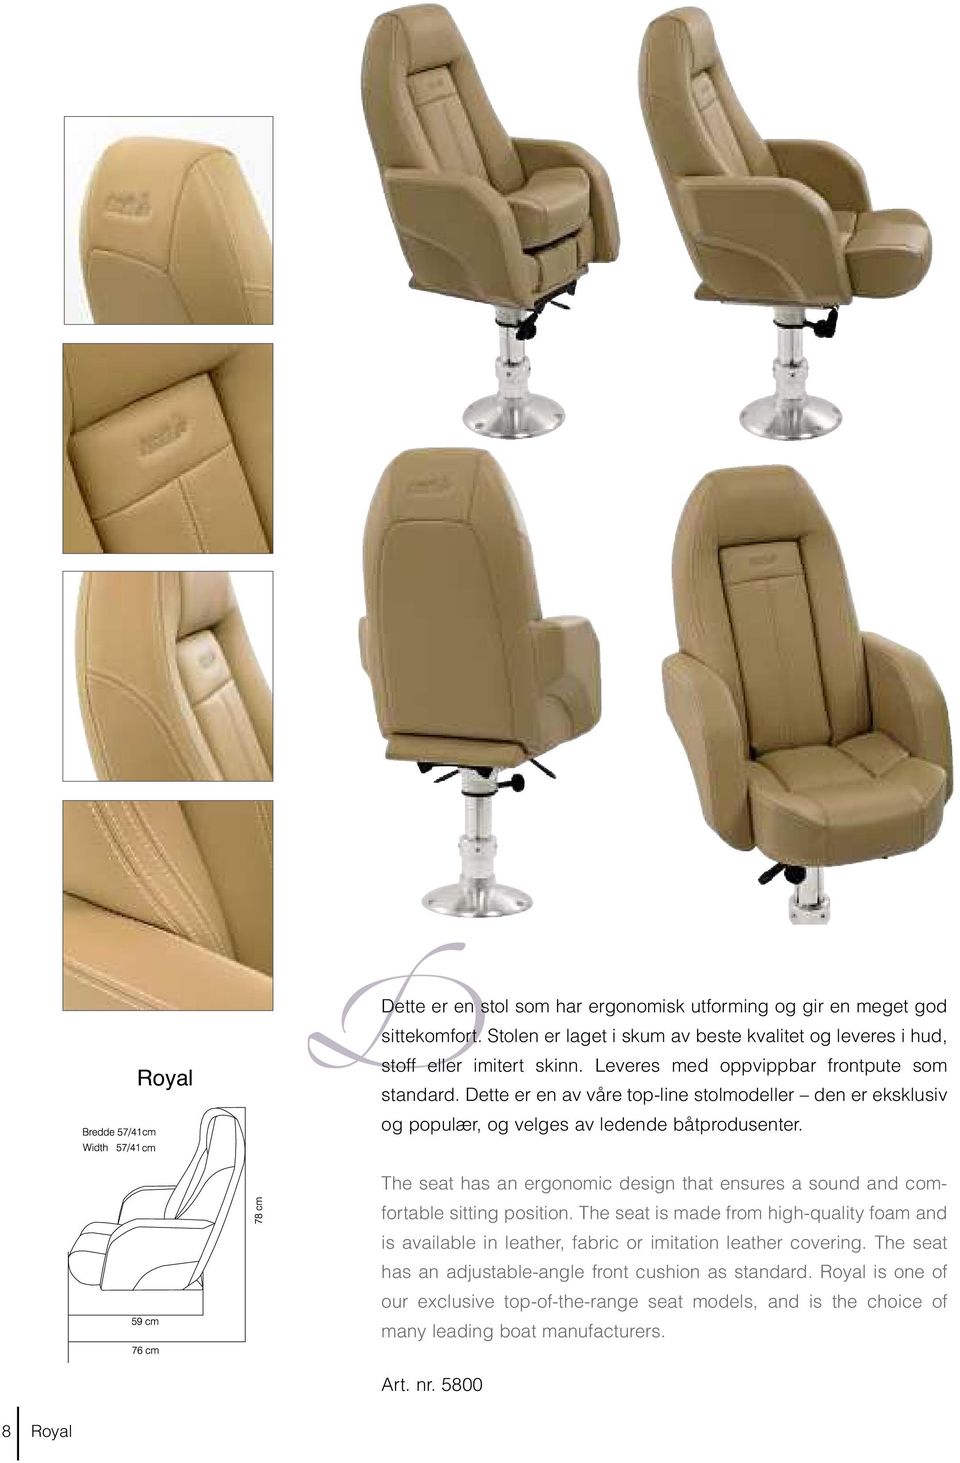 The seat has an ergonomic design that ensures a sound and comfortable sitting position.